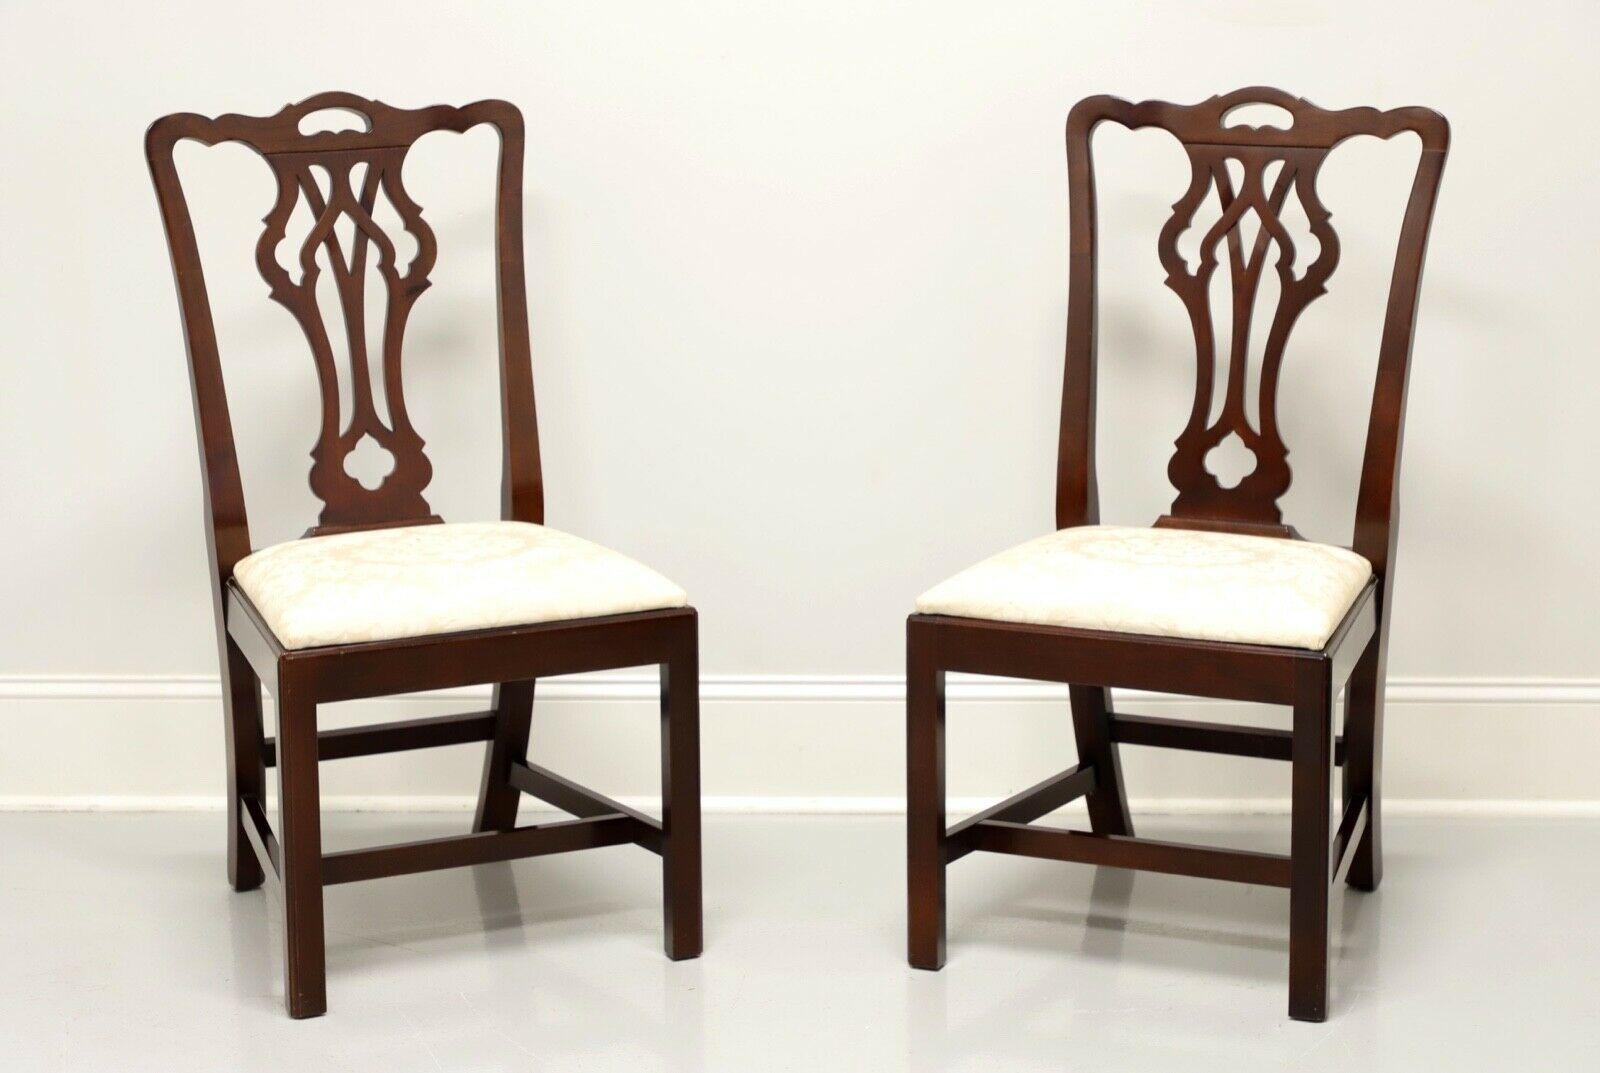 STATTON Old Towne Cherry Chippendale Dining Side Chairs - Pair A 6